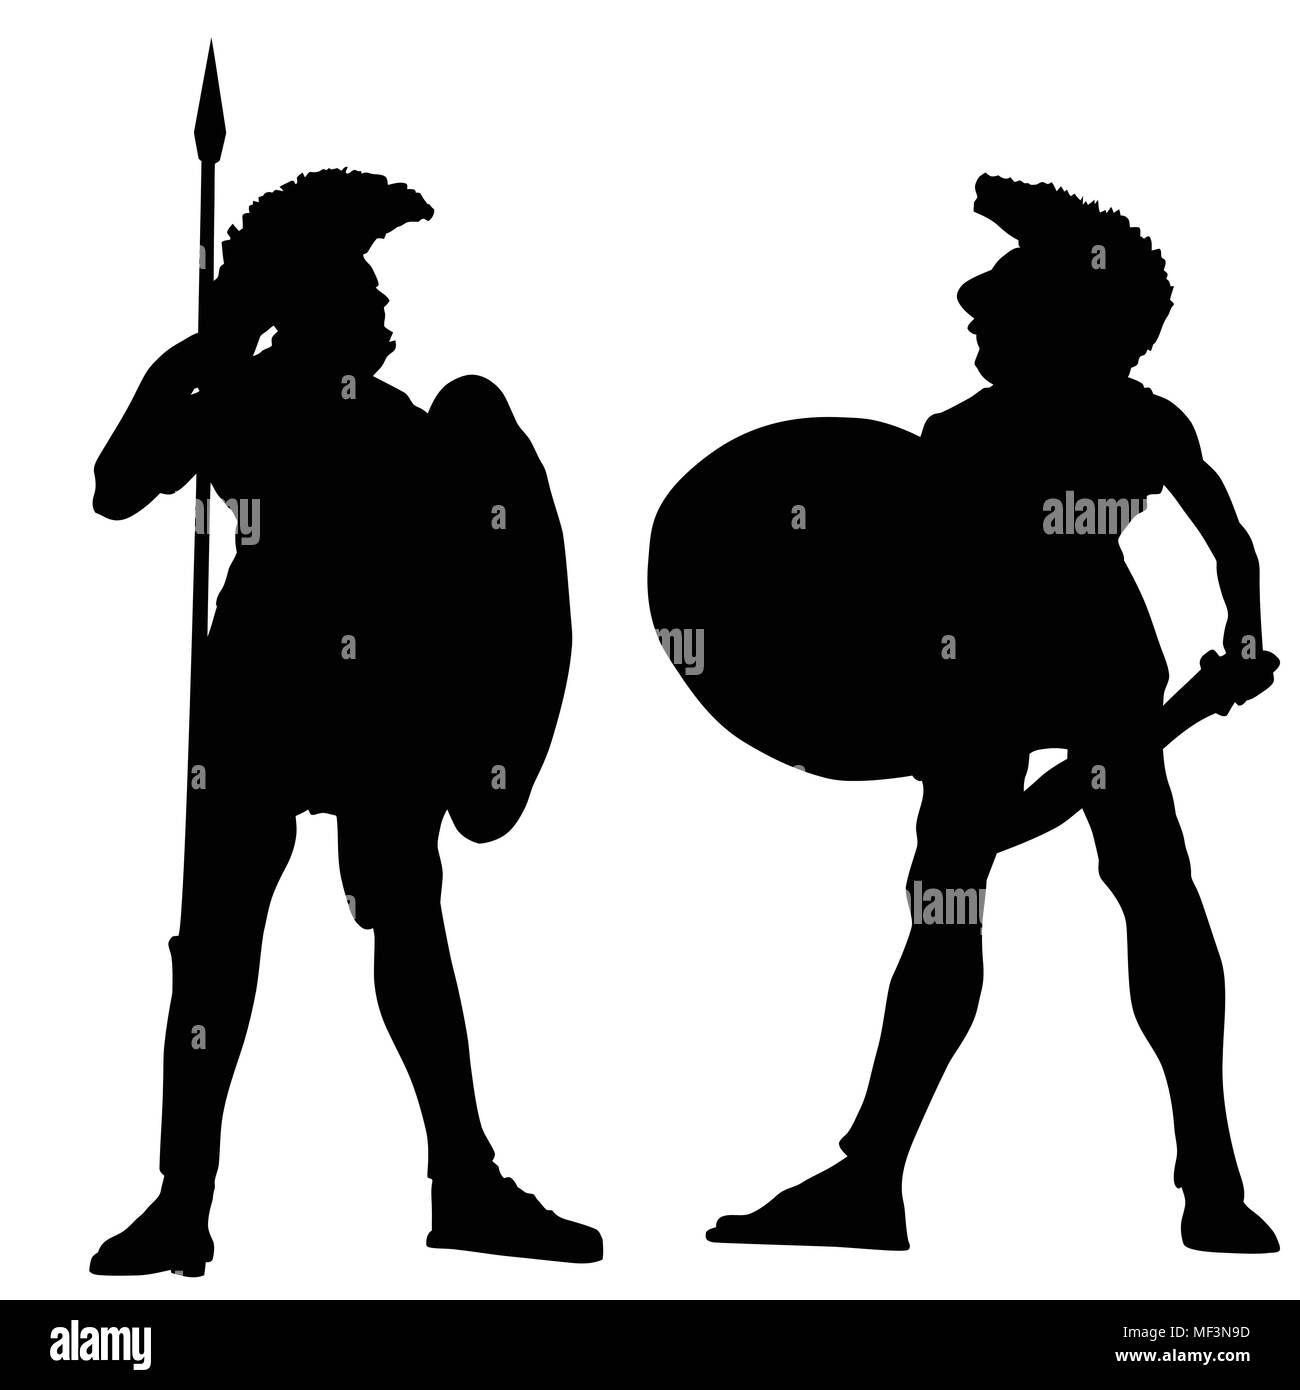 Spartan warrior silhouettes on white background, vector illustration Stock Vector